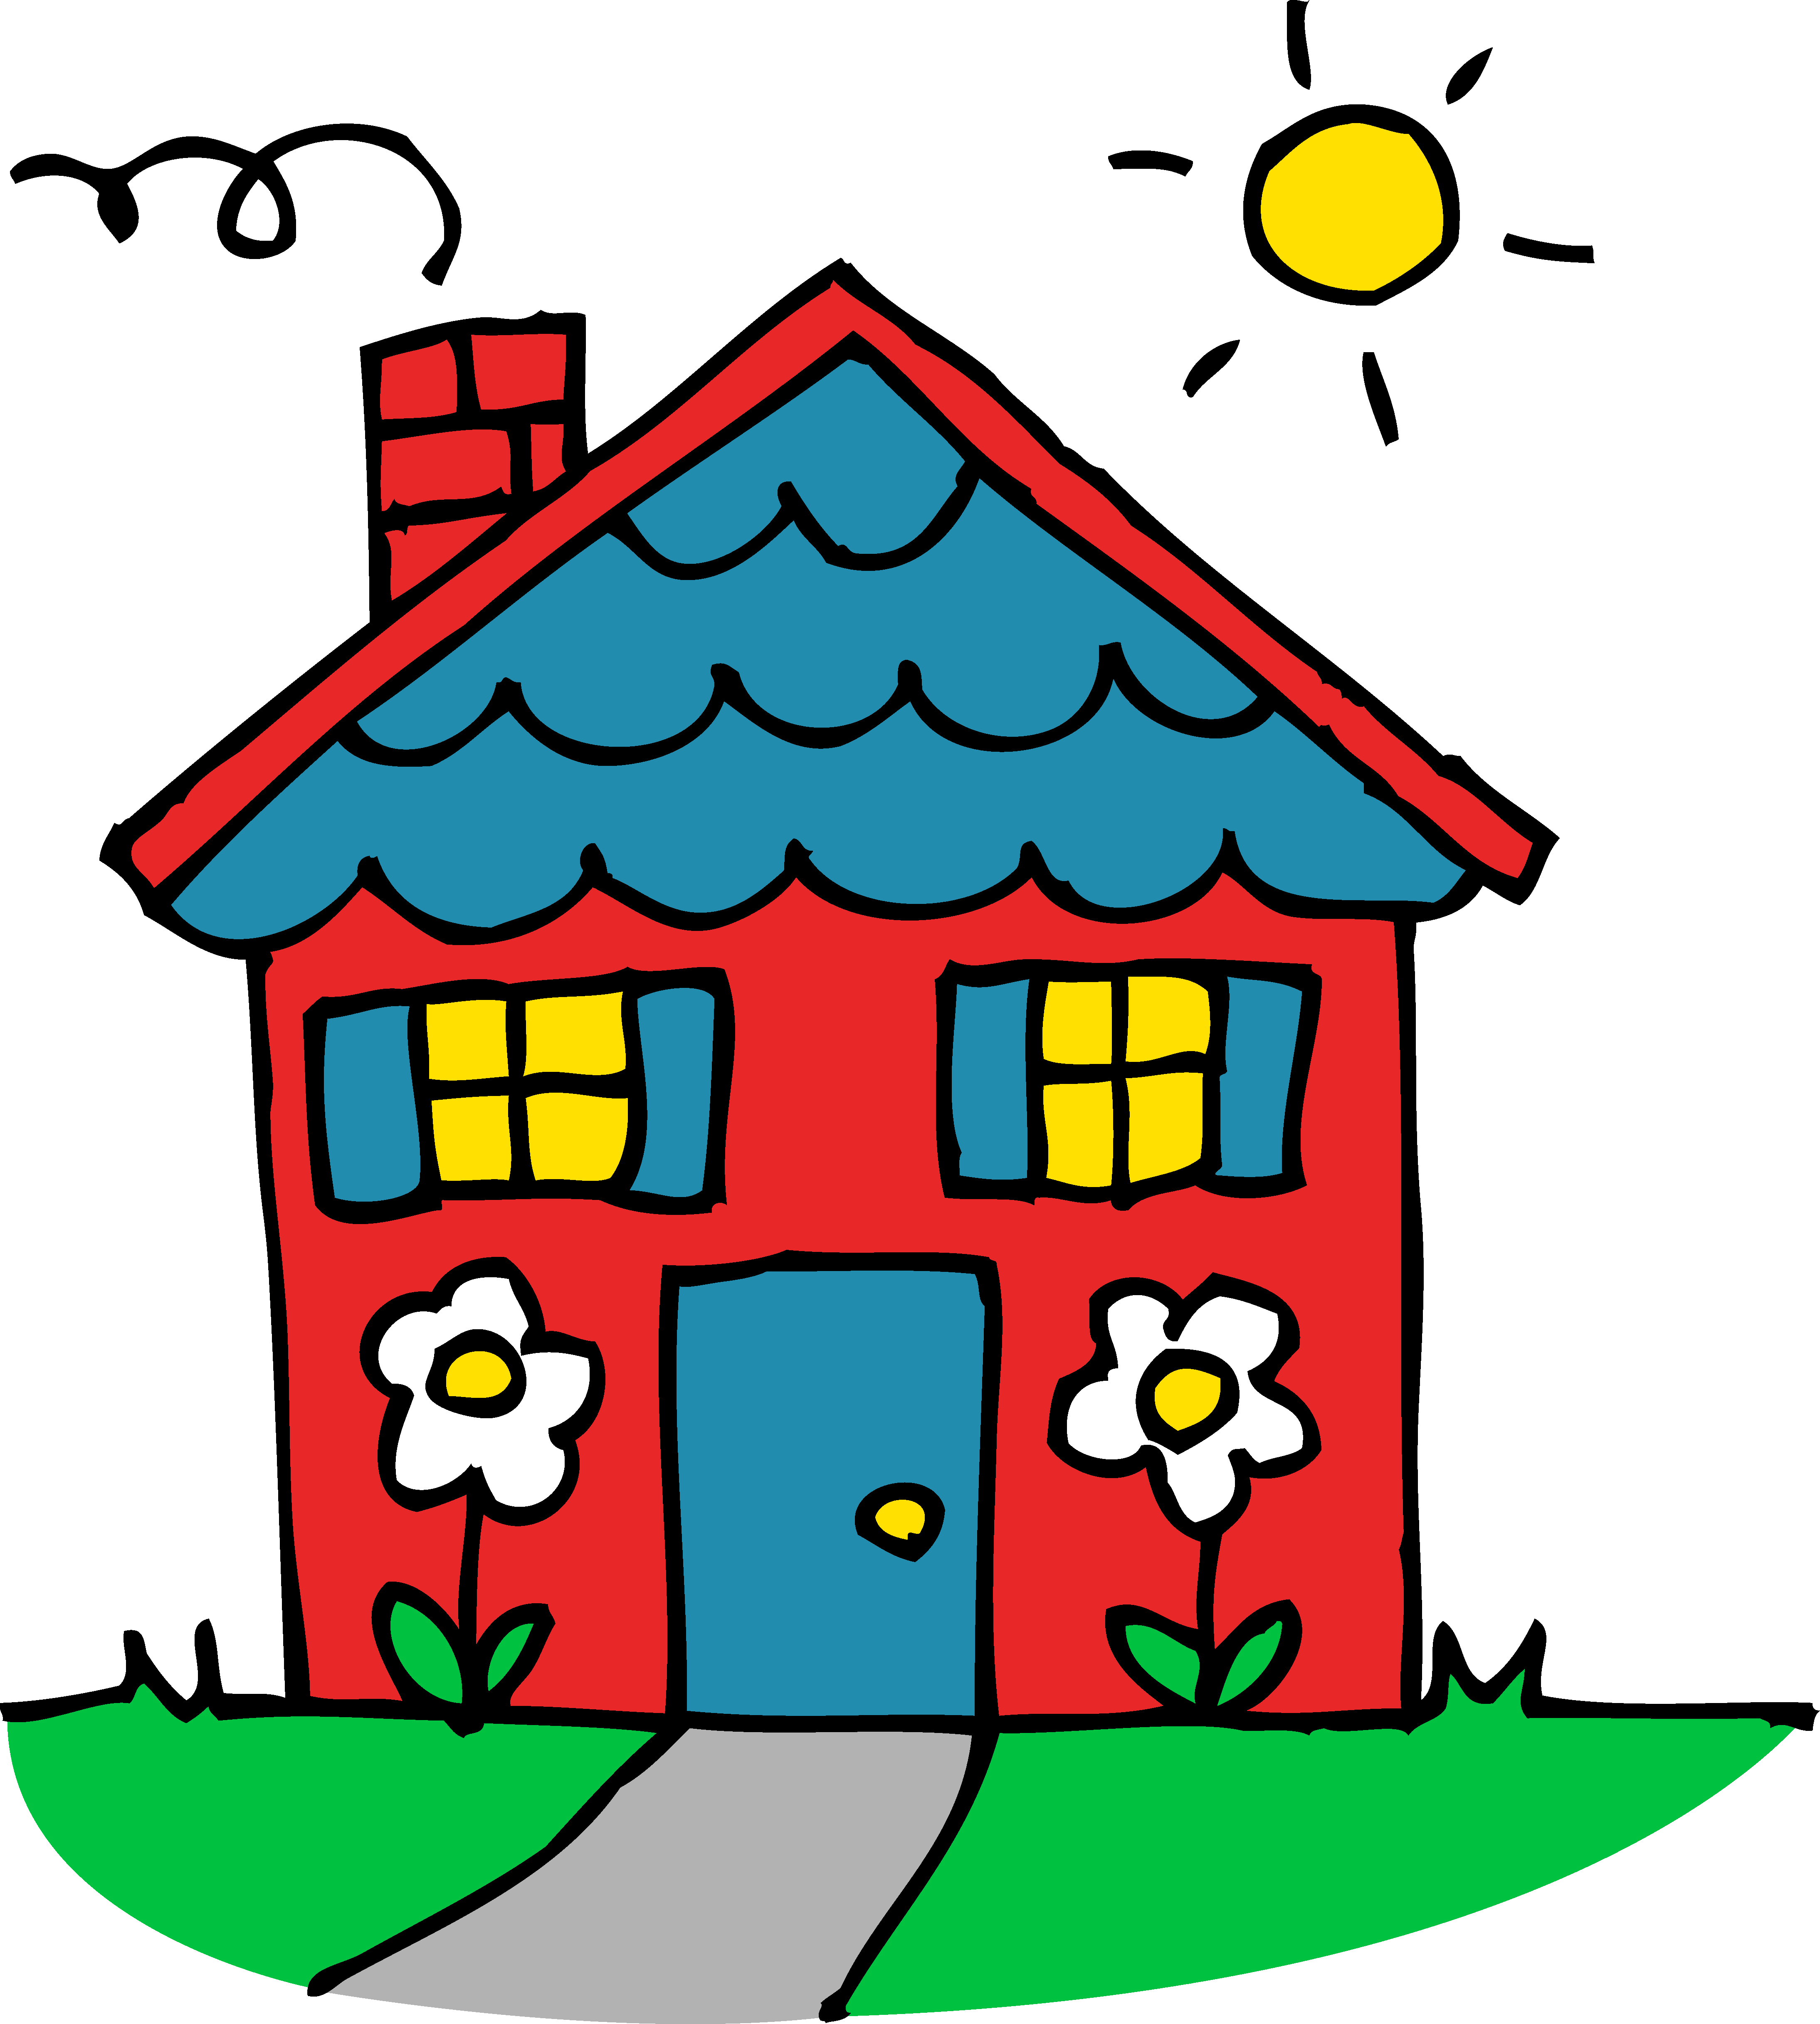 Charming little red house. Mansion clipart easy cartoon